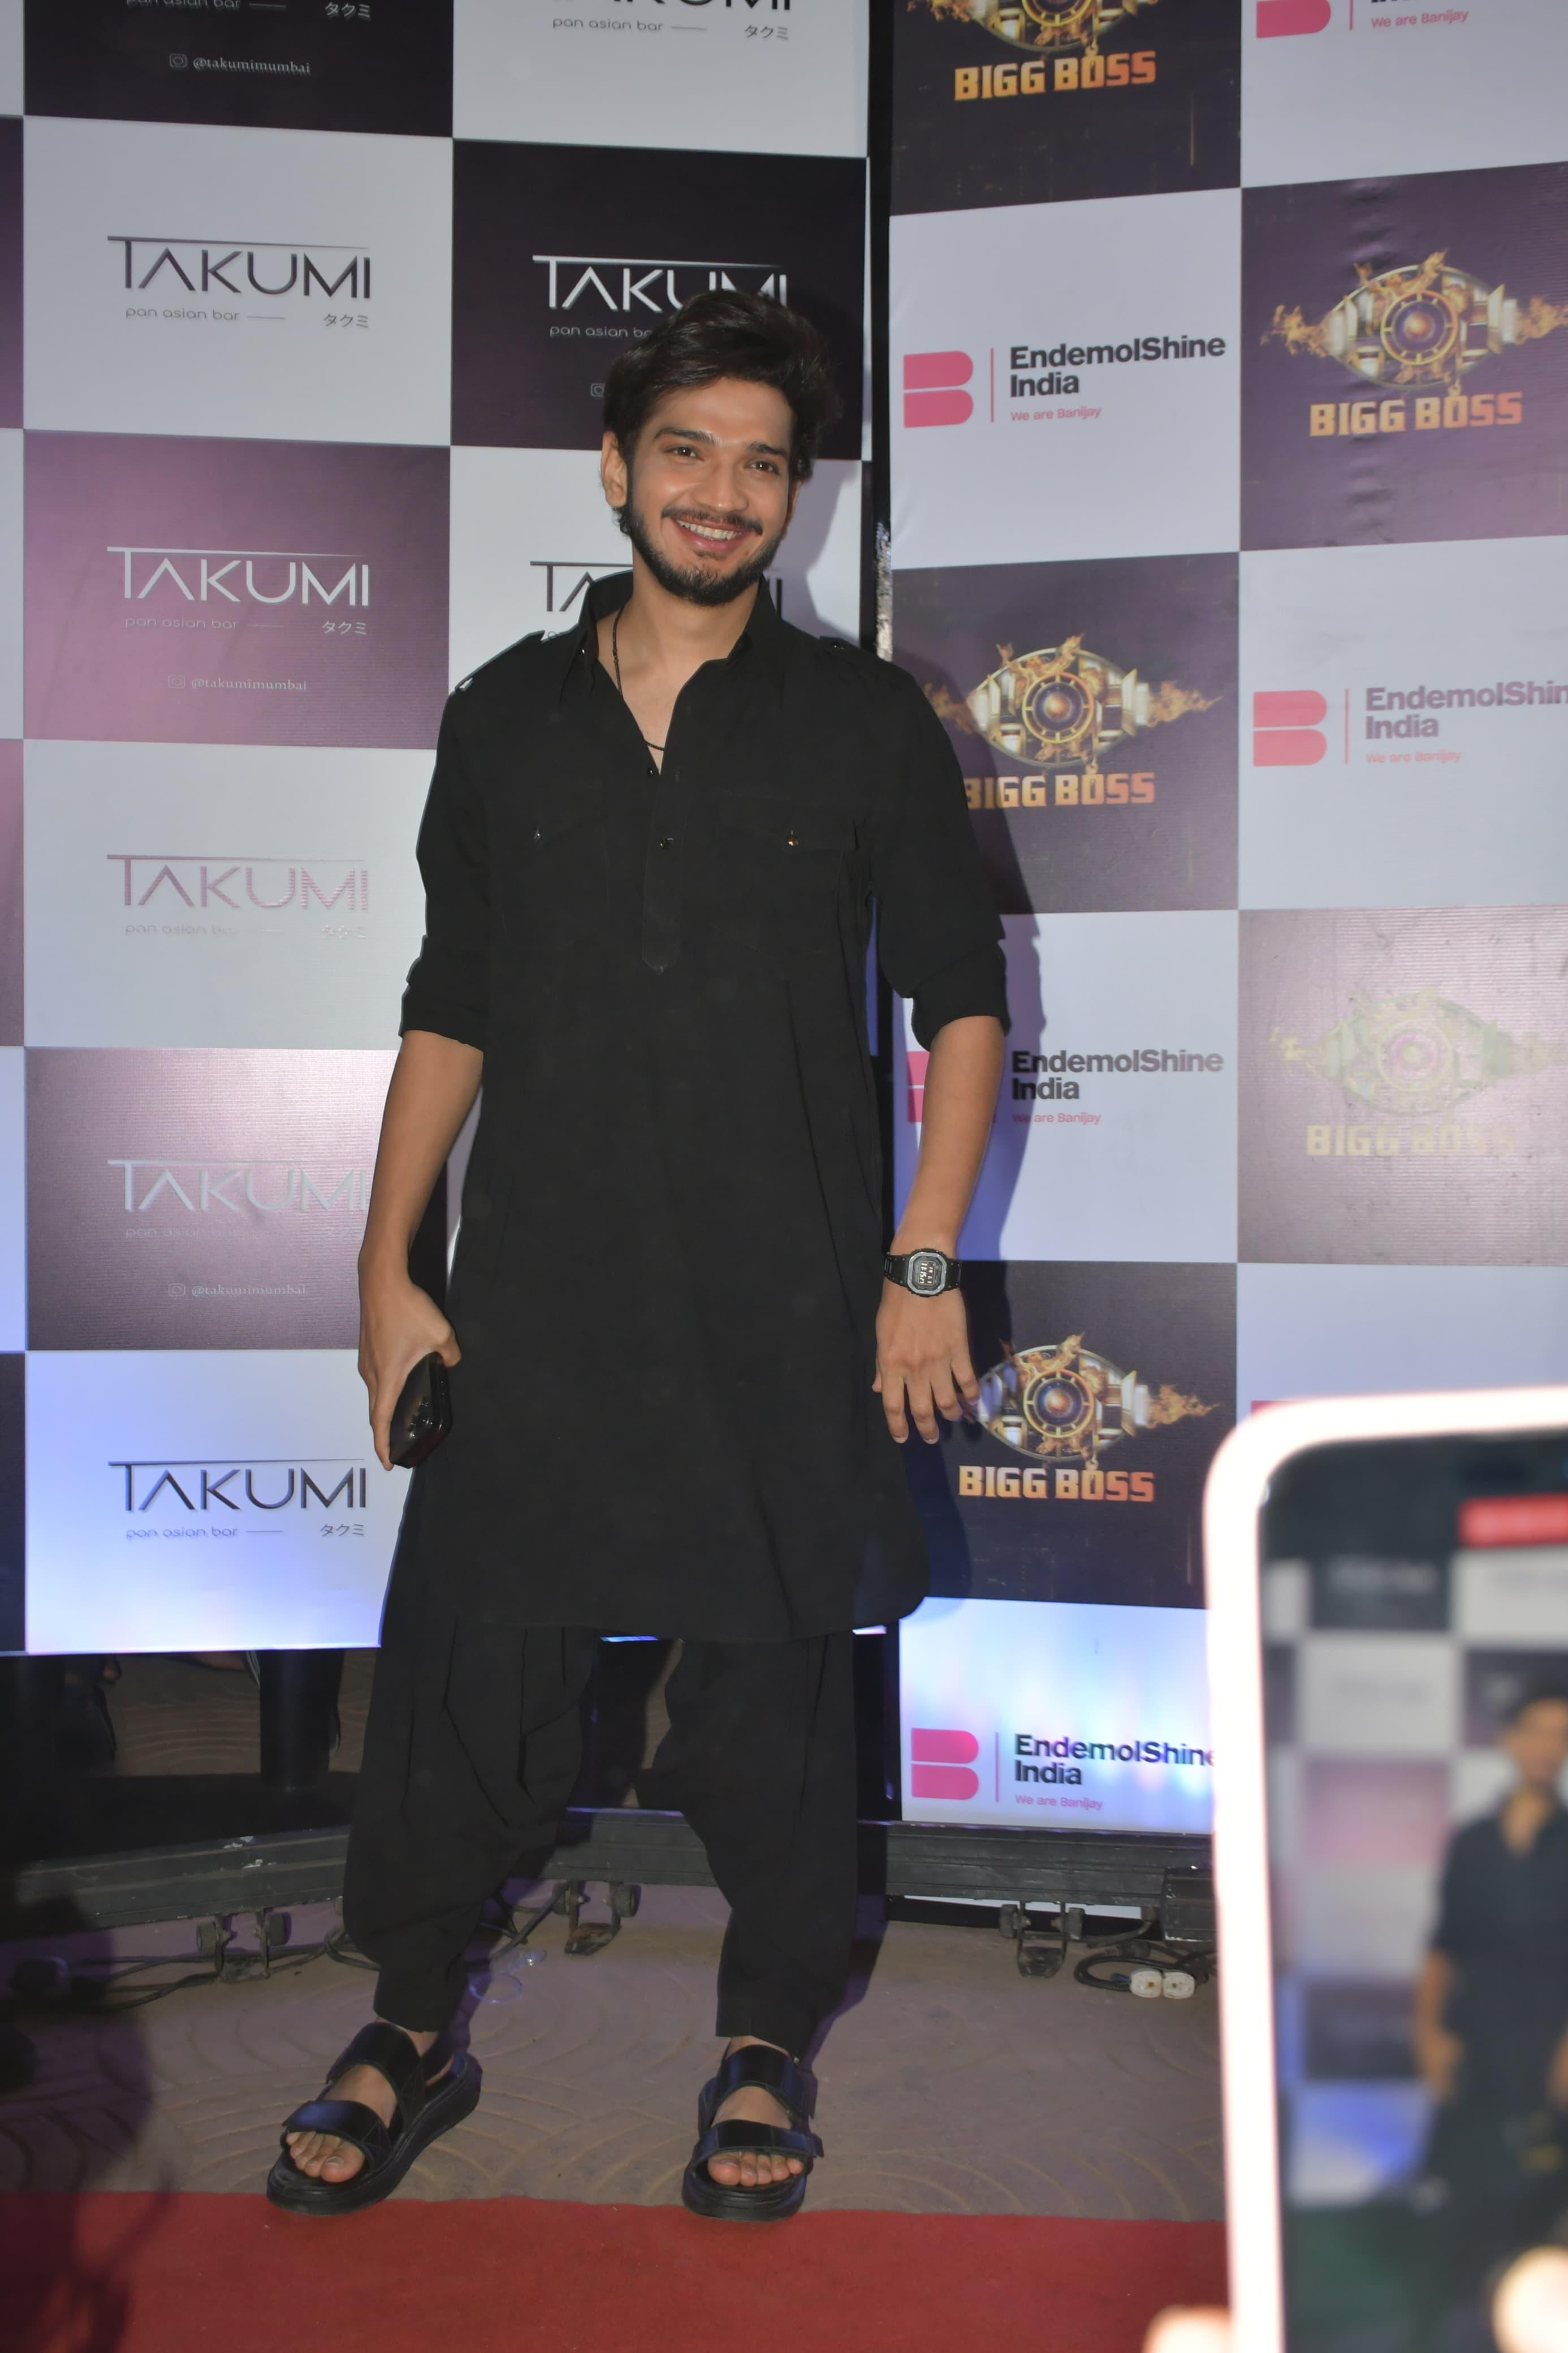 'Bigg Boss 17' winner Munawar Faruqui arrived in a chic black Pathani kurta-pajama, drawing a large crowd along the red carpet. Fans chanted 'Dongri Ka King' as he posed for the paparazzi